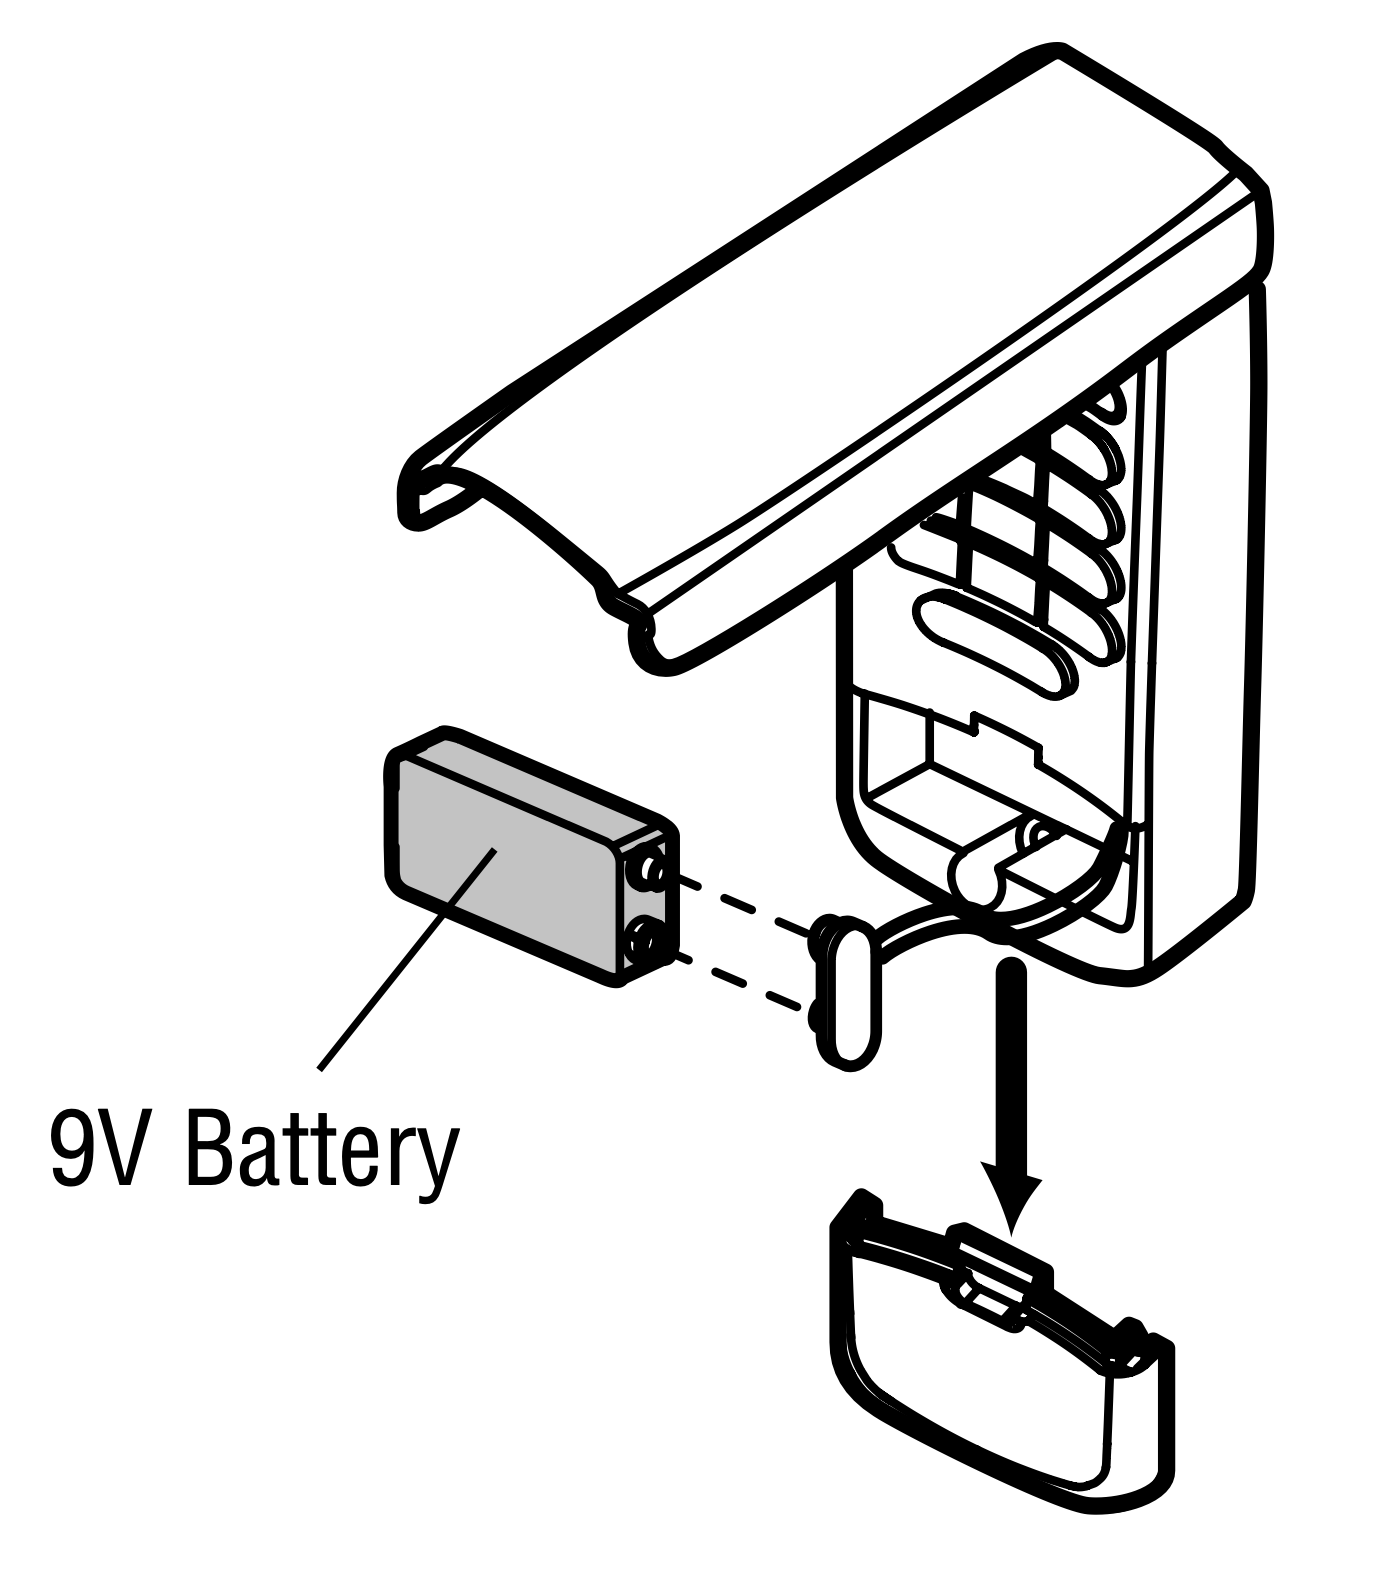 Slide down cover on front allows access to the battery. Screenshot credit: Chamberlain Owners Manual